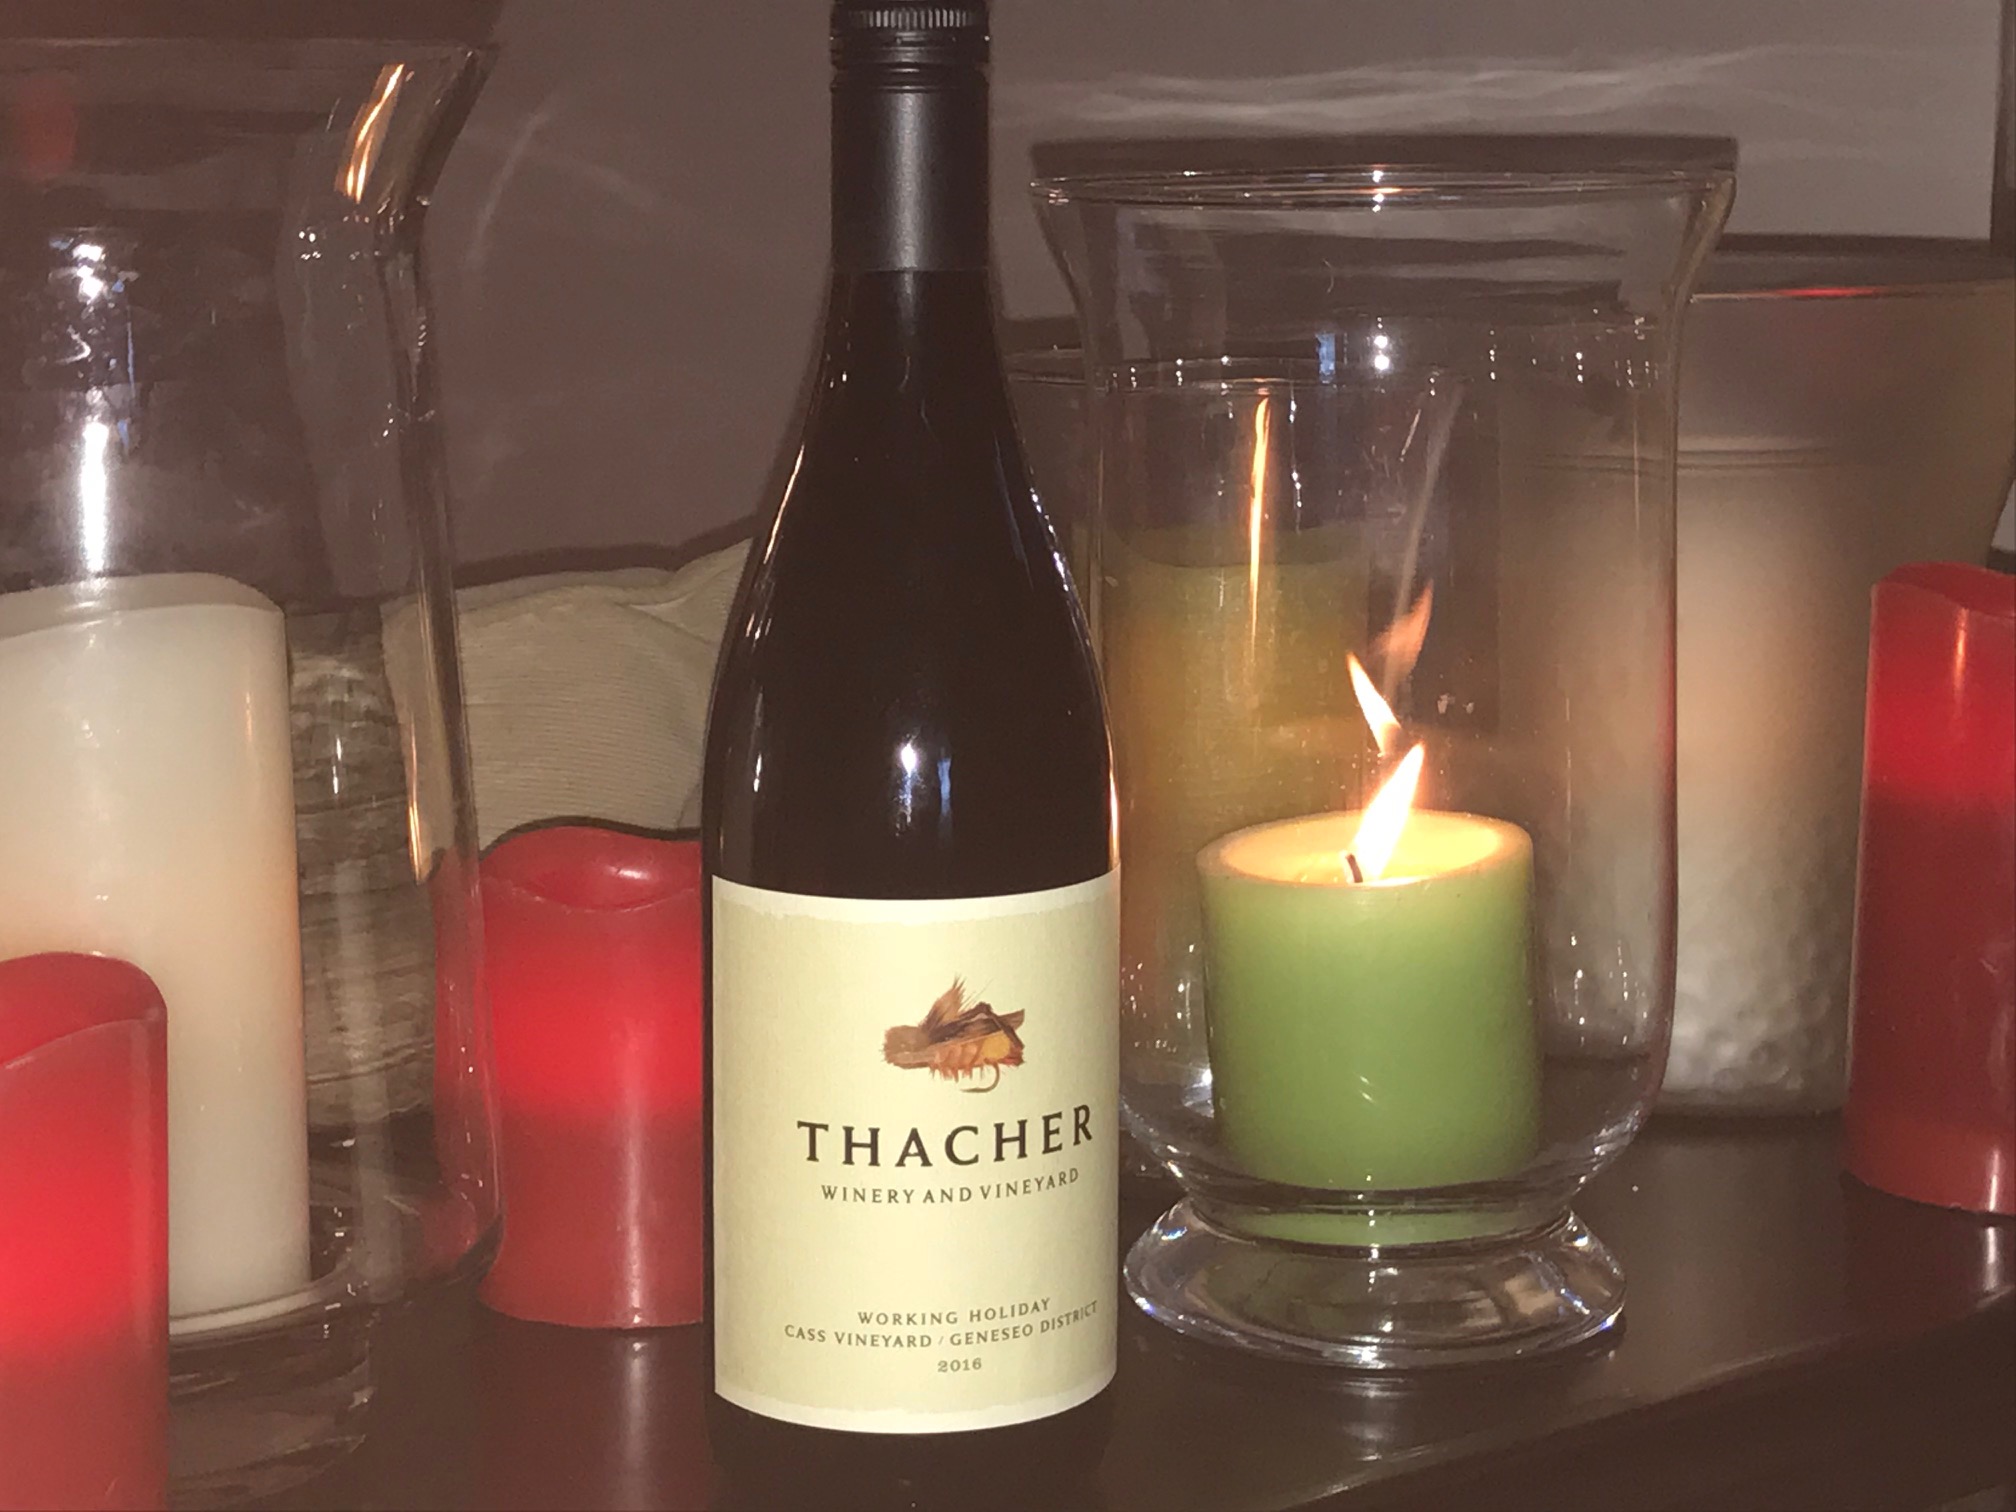 Thacher Winery Working Holiday 2017